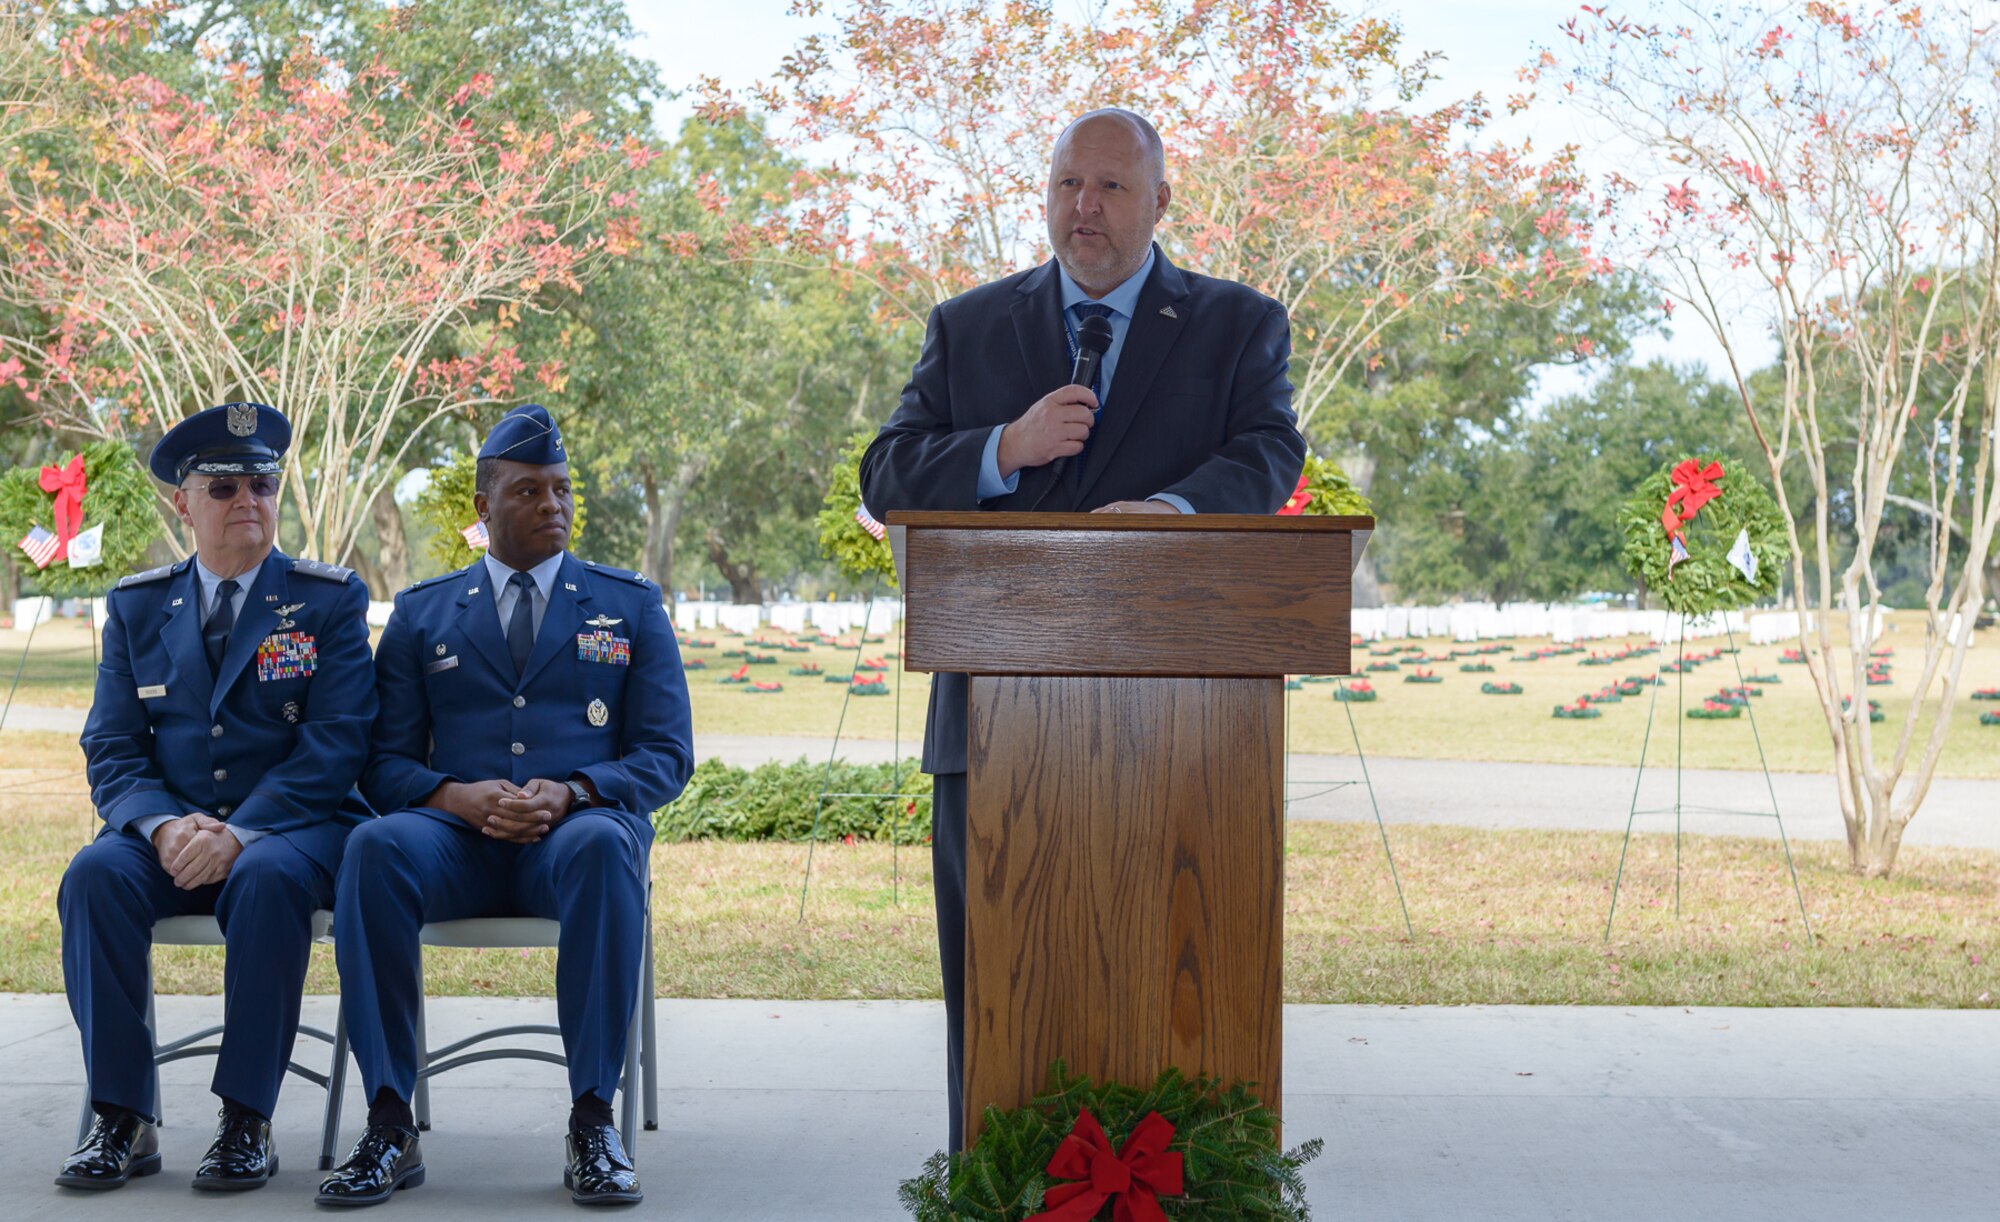 U.S. Army retired Chief Warrant Officer Shawn Hamner, Biloxi National Cemetery director, delivers comments during the Wreaths Across America ceremony at the Biloxi National Cemetery Dec. 16, 2017, in Biloxi, Mississippi. Wreaths Across America, a non-profit organization, was formed as an extension of the Arlington Wreath Project. The Arlington Wreath program was started by Morrill Worcester in 1992 with the donation and laying of 5000 Christmas wreaths to Arlington National Cemetery. (U.S. Air Force photo by André Askew)